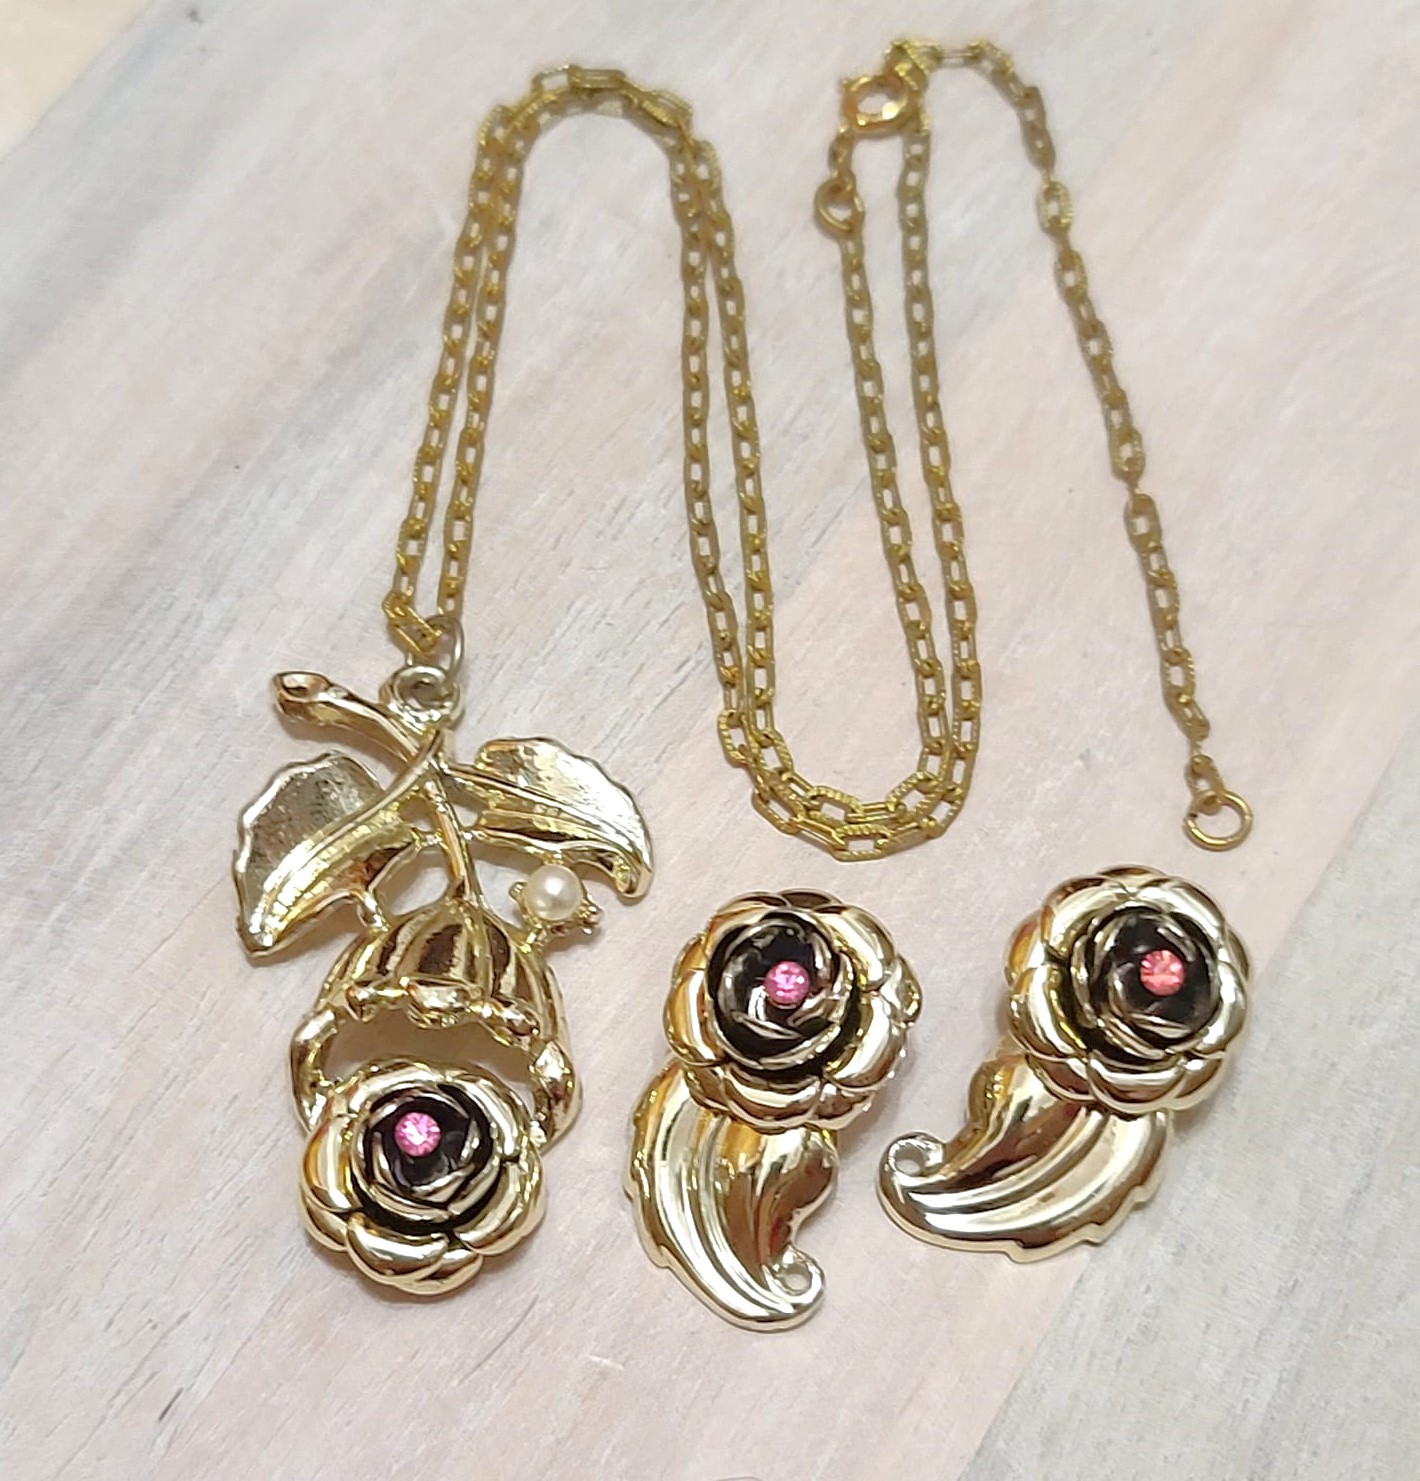 Vintage rose necklace and clip on earrings, rose design with pink rhinestones